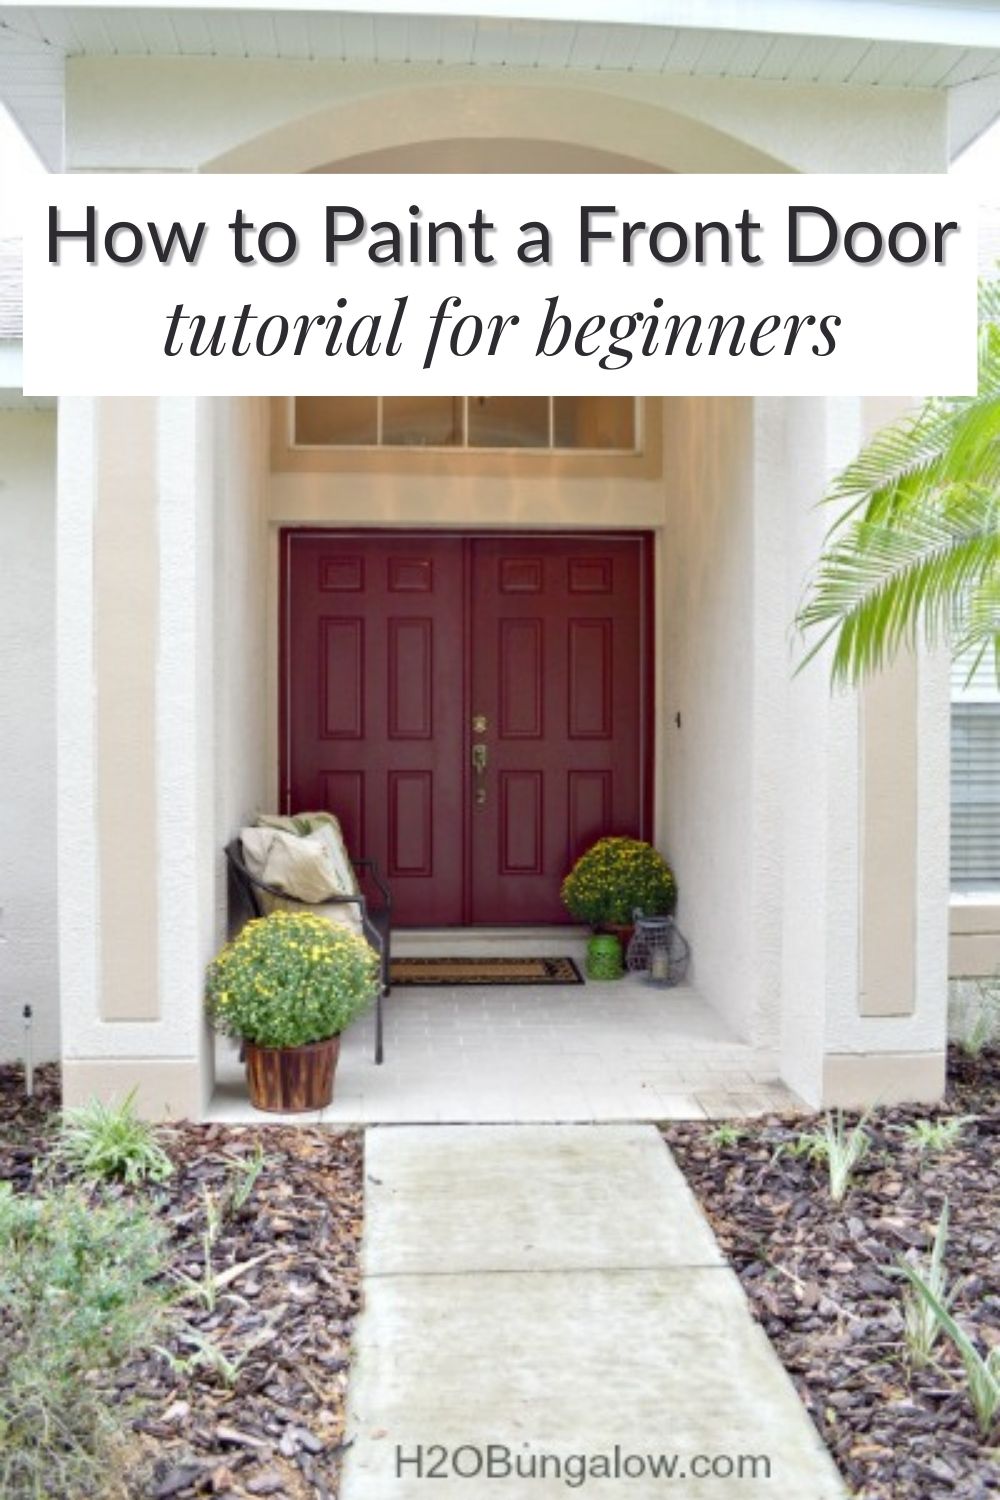 Newly painted front door with text overlay "How to paint a front door tutorial for beginners